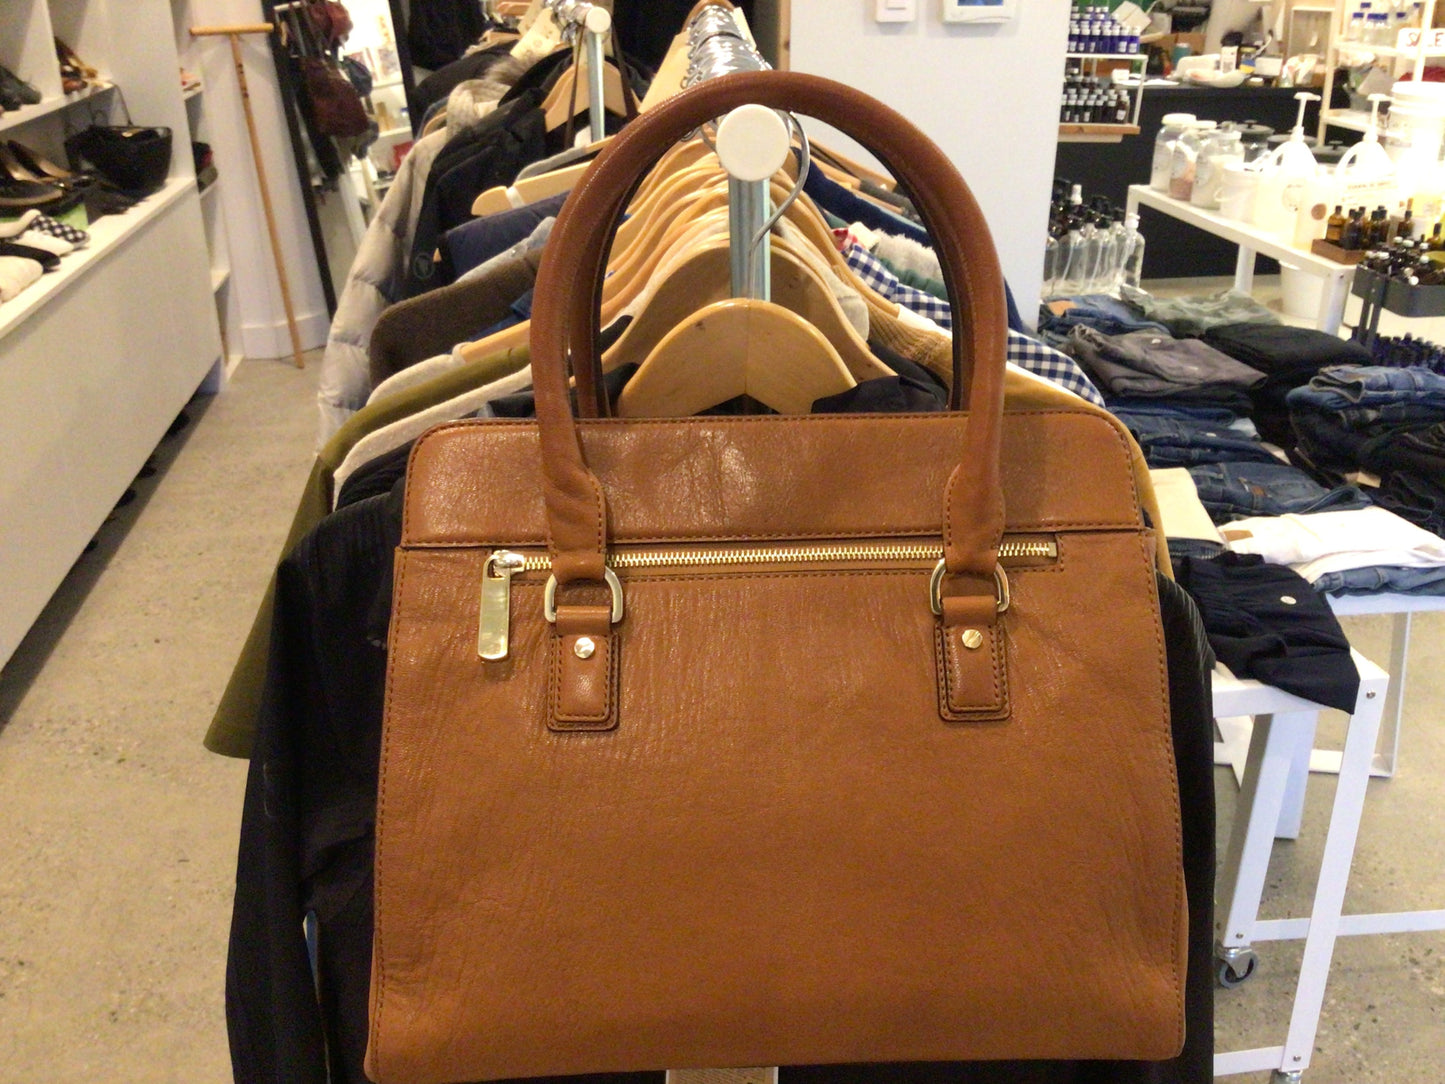 Consignment 1915-06 Michael Kors bag with additional strap and storage sleeve.